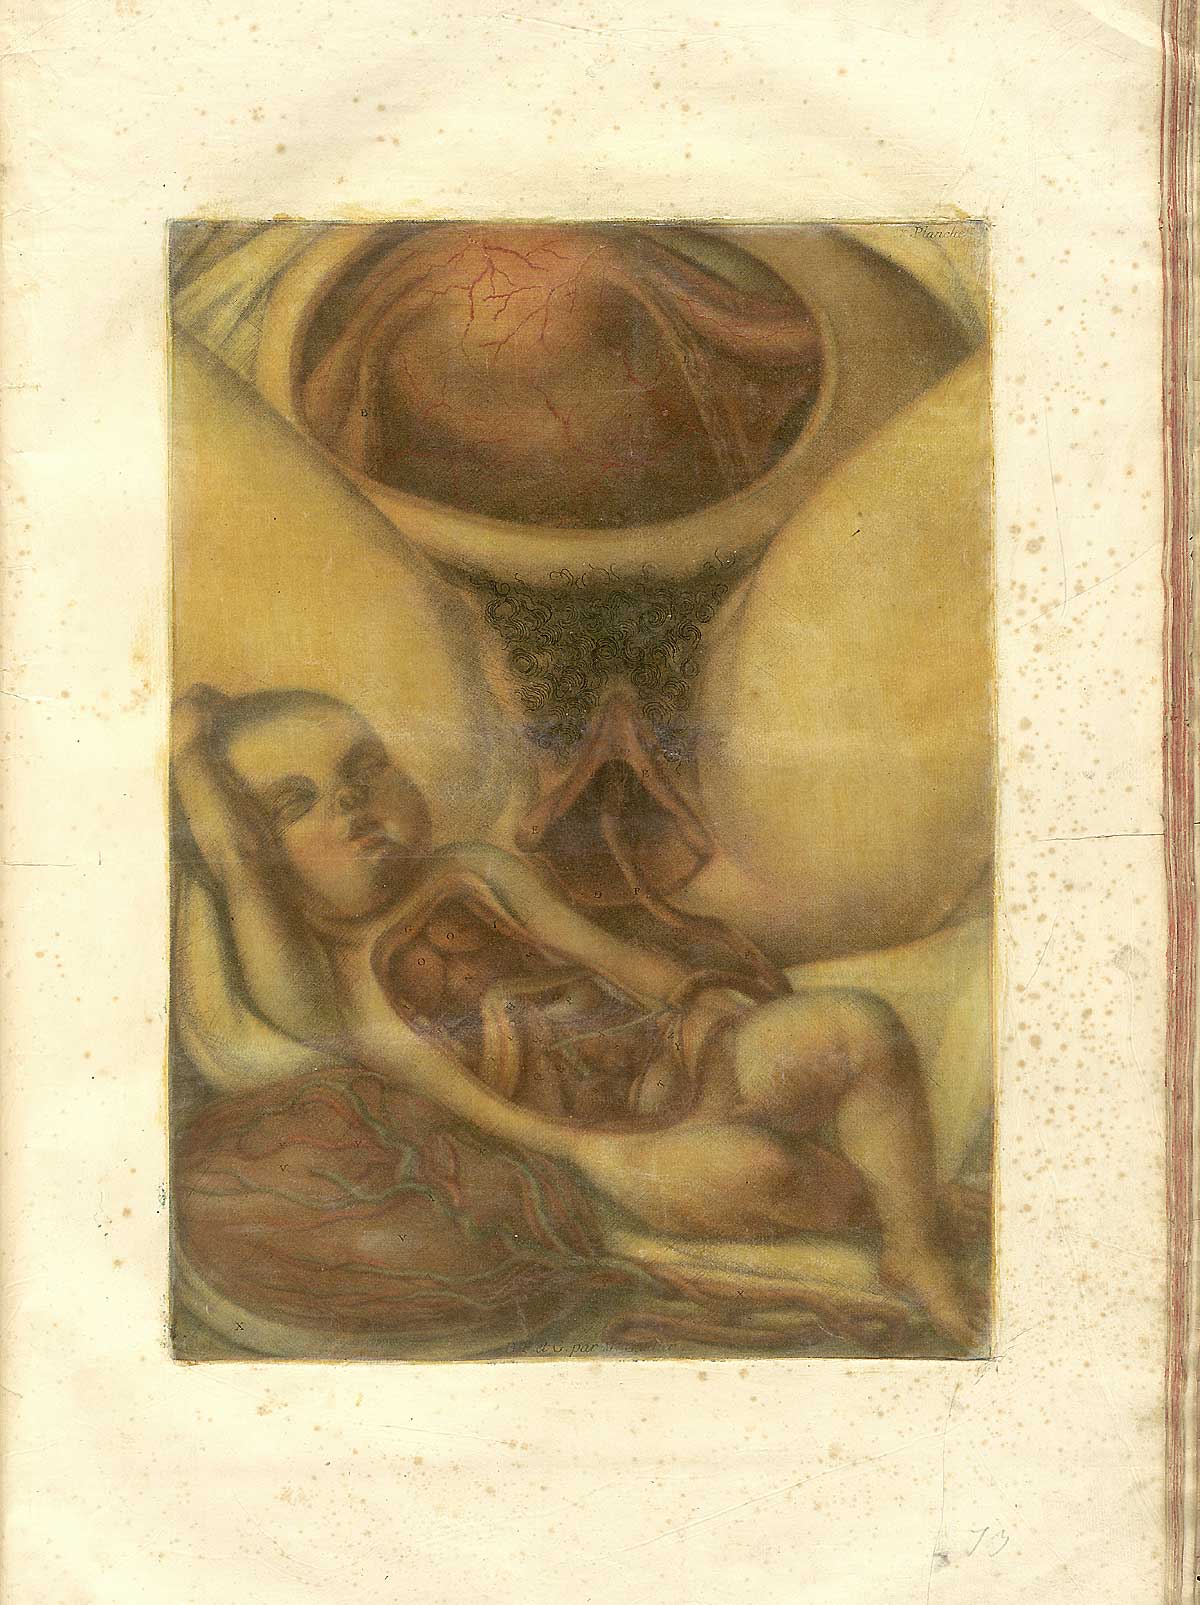 Color mezzotint of a newborn baby just outside its mother’s labia with umbilical cord still attached and running up the vagina; the baby has its flesh removed from its torso and abdomen to reveal its internal organs, and the placenta lies under his right elbow; from Jacques Fabian Gautier d’Agoty’s Anatomie générale des viscères en situation, NLM Call no.: WZ 260 G283c 1745.